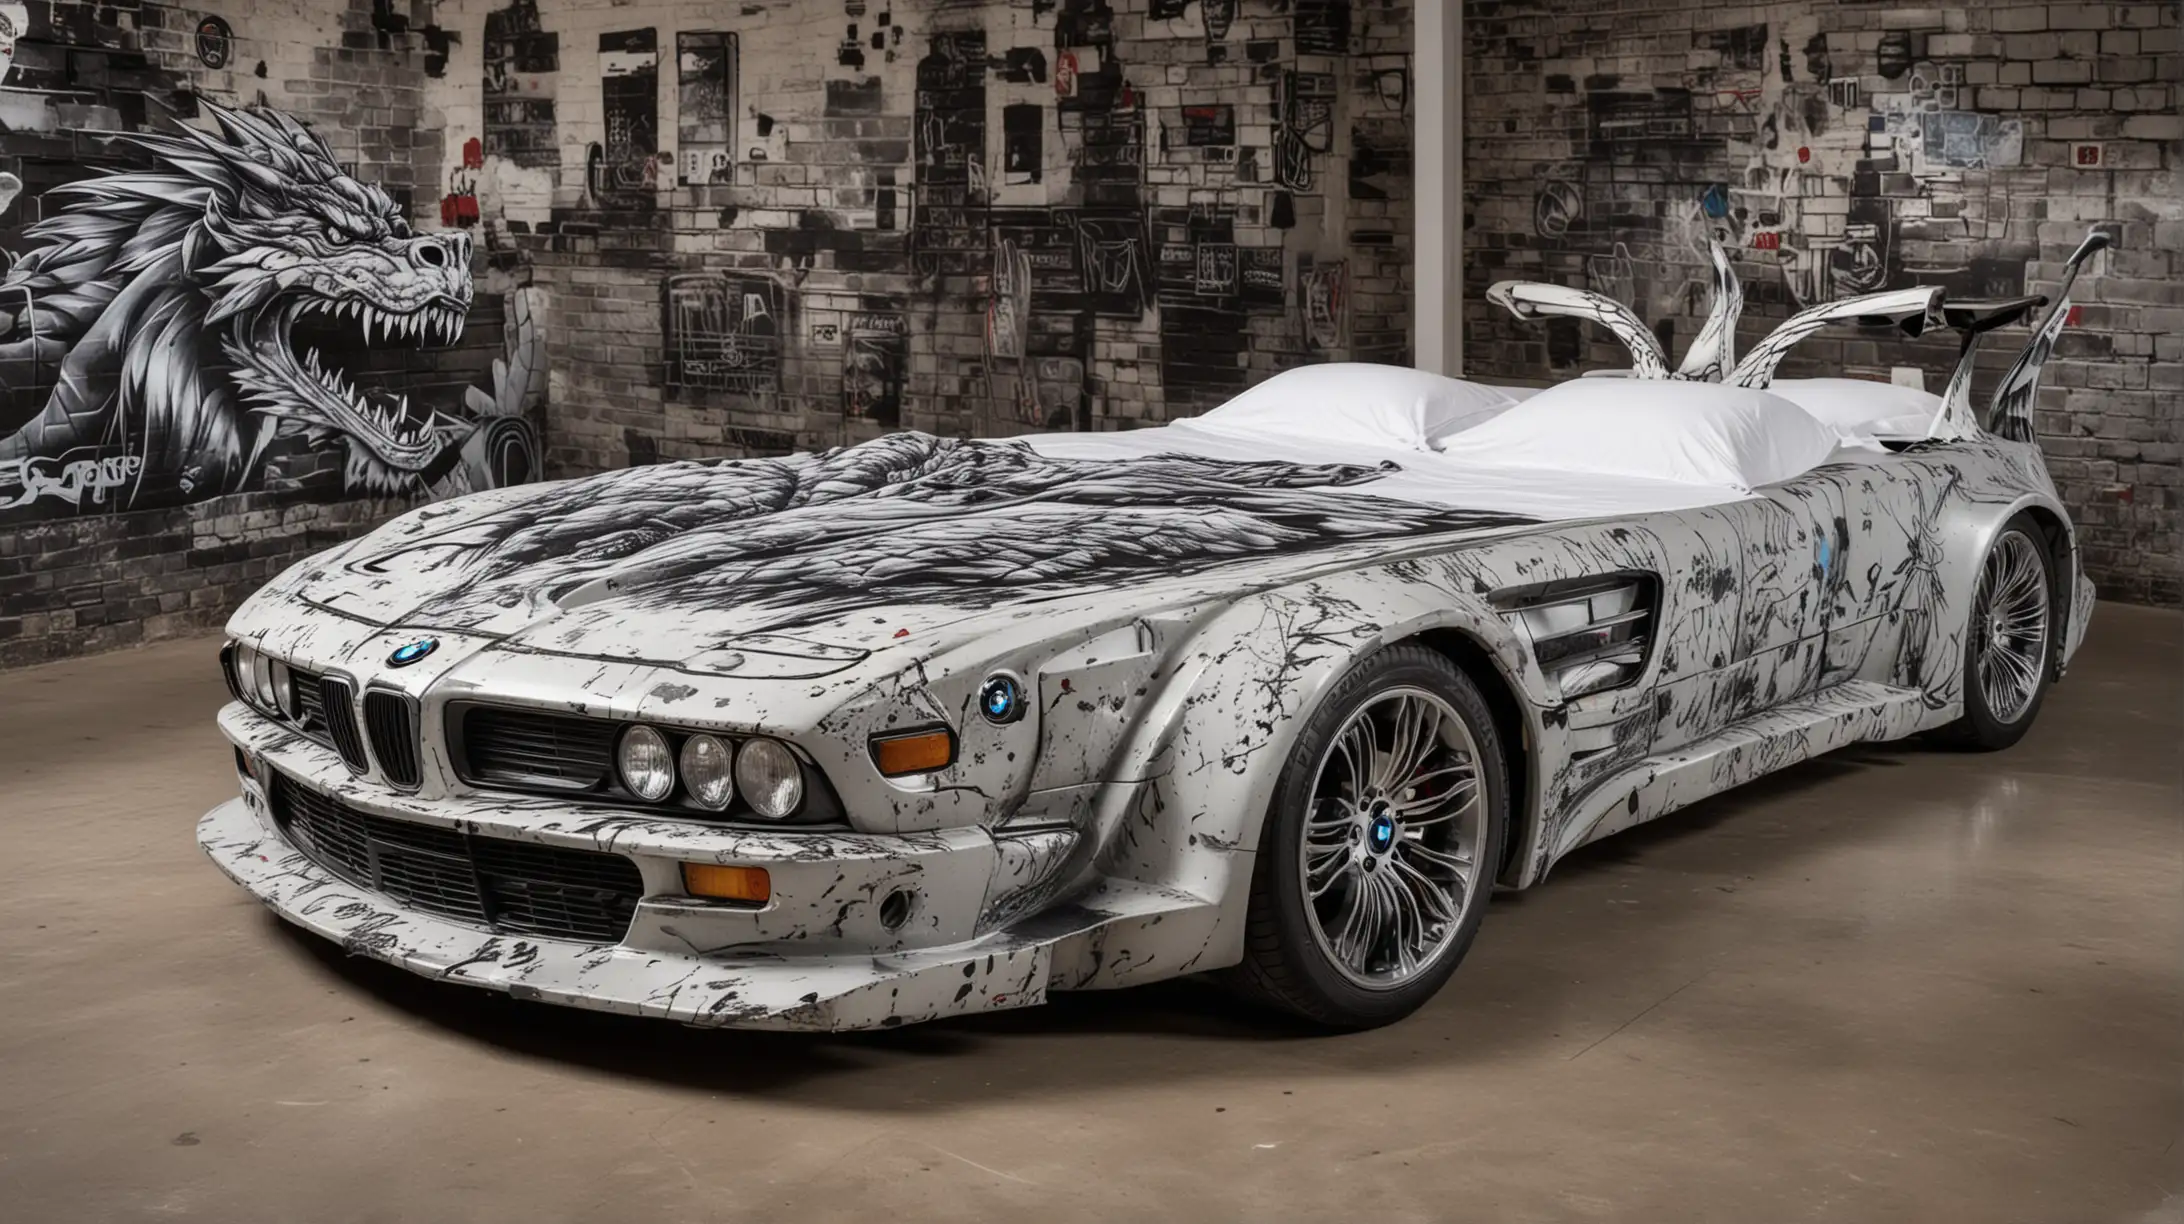 BMW Car Shaped Double Bed with Dragon Graffiti Illuminated by Headlights